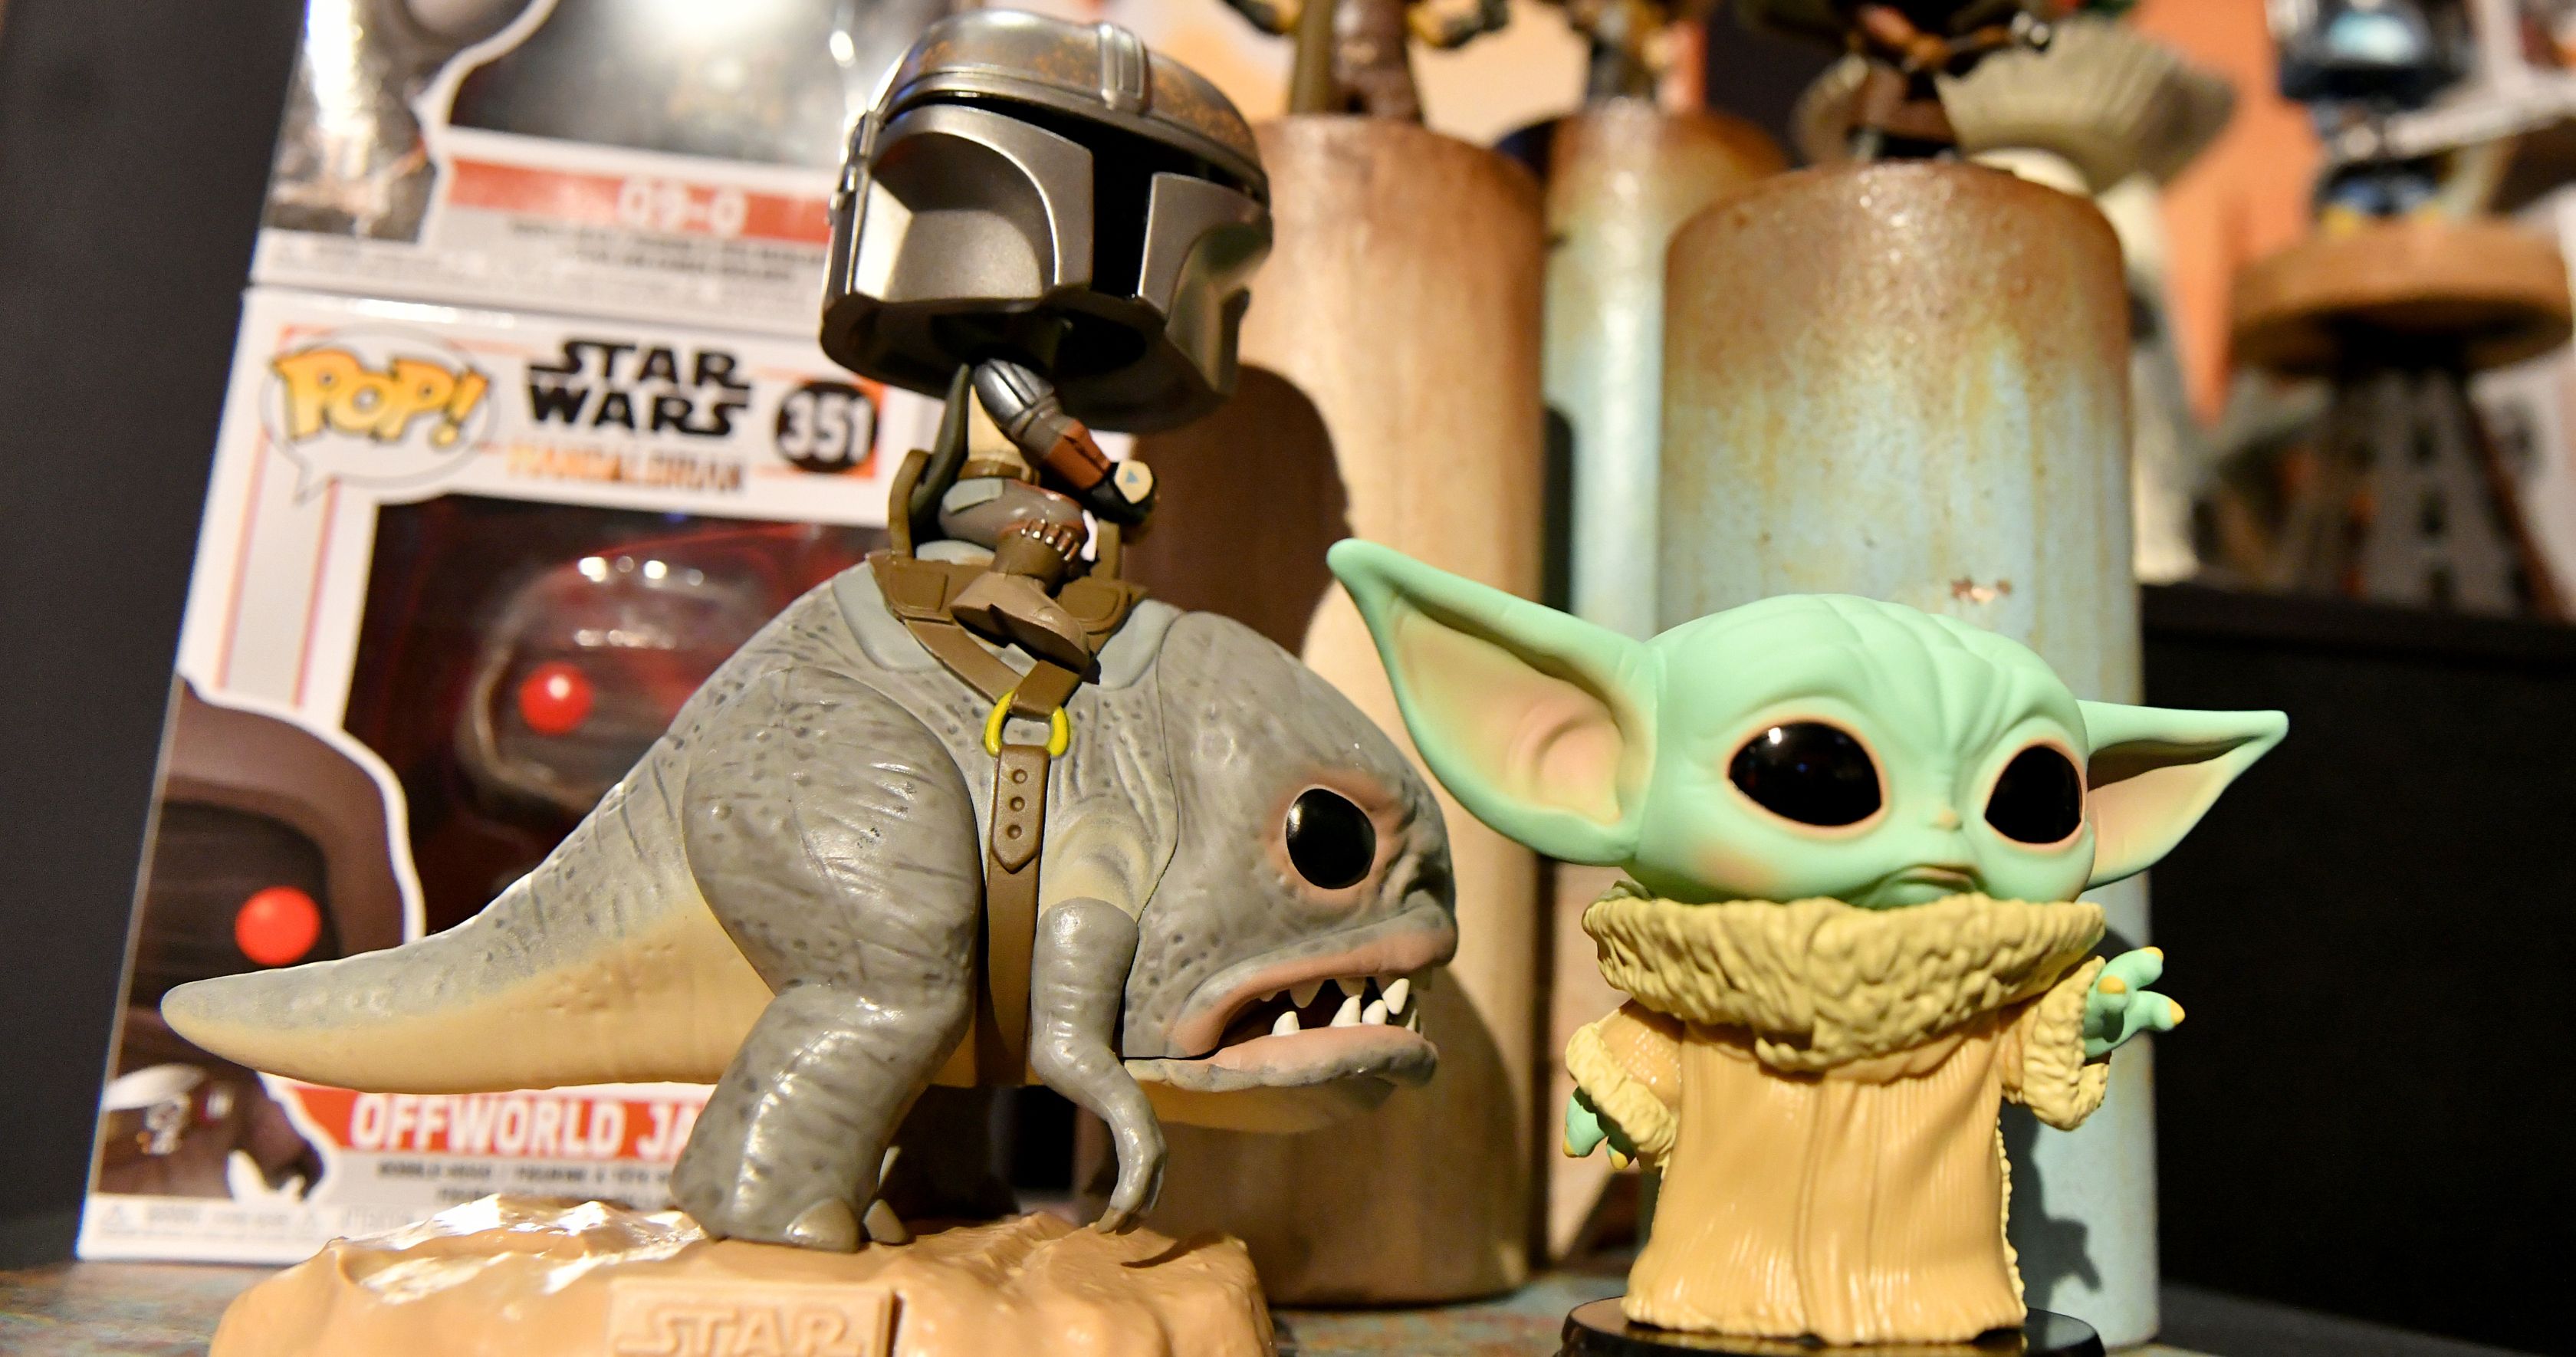 The Mandalorian and Star Wars: The Clone Wars Toys Rule New York Toy Fair